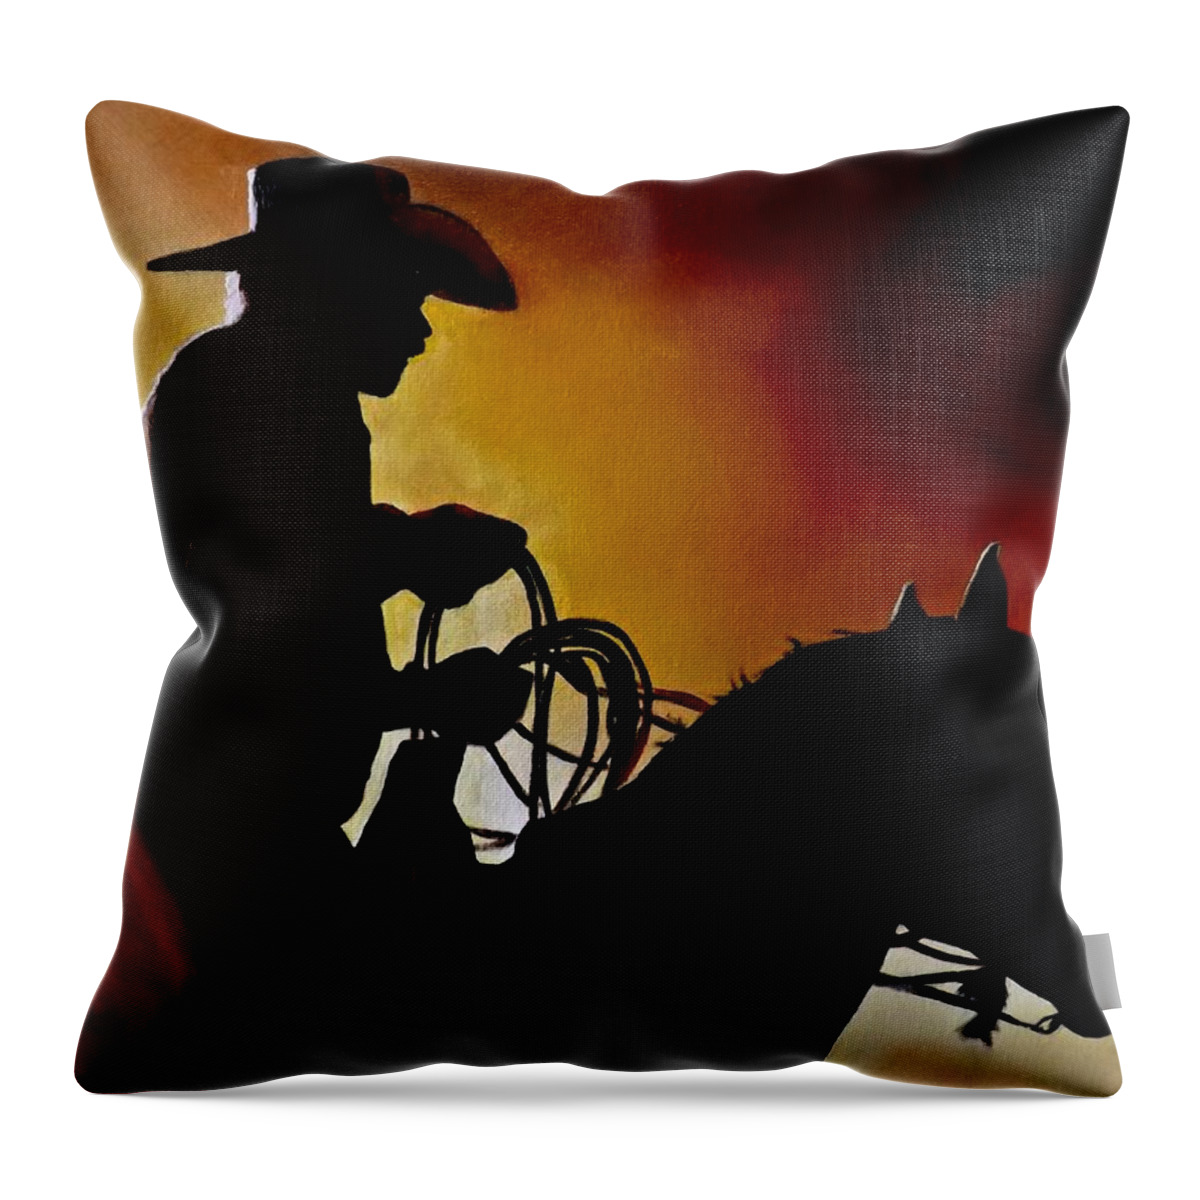 Cowboy Throw Pillow featuring the painting Last Roping by Barry BLAKE